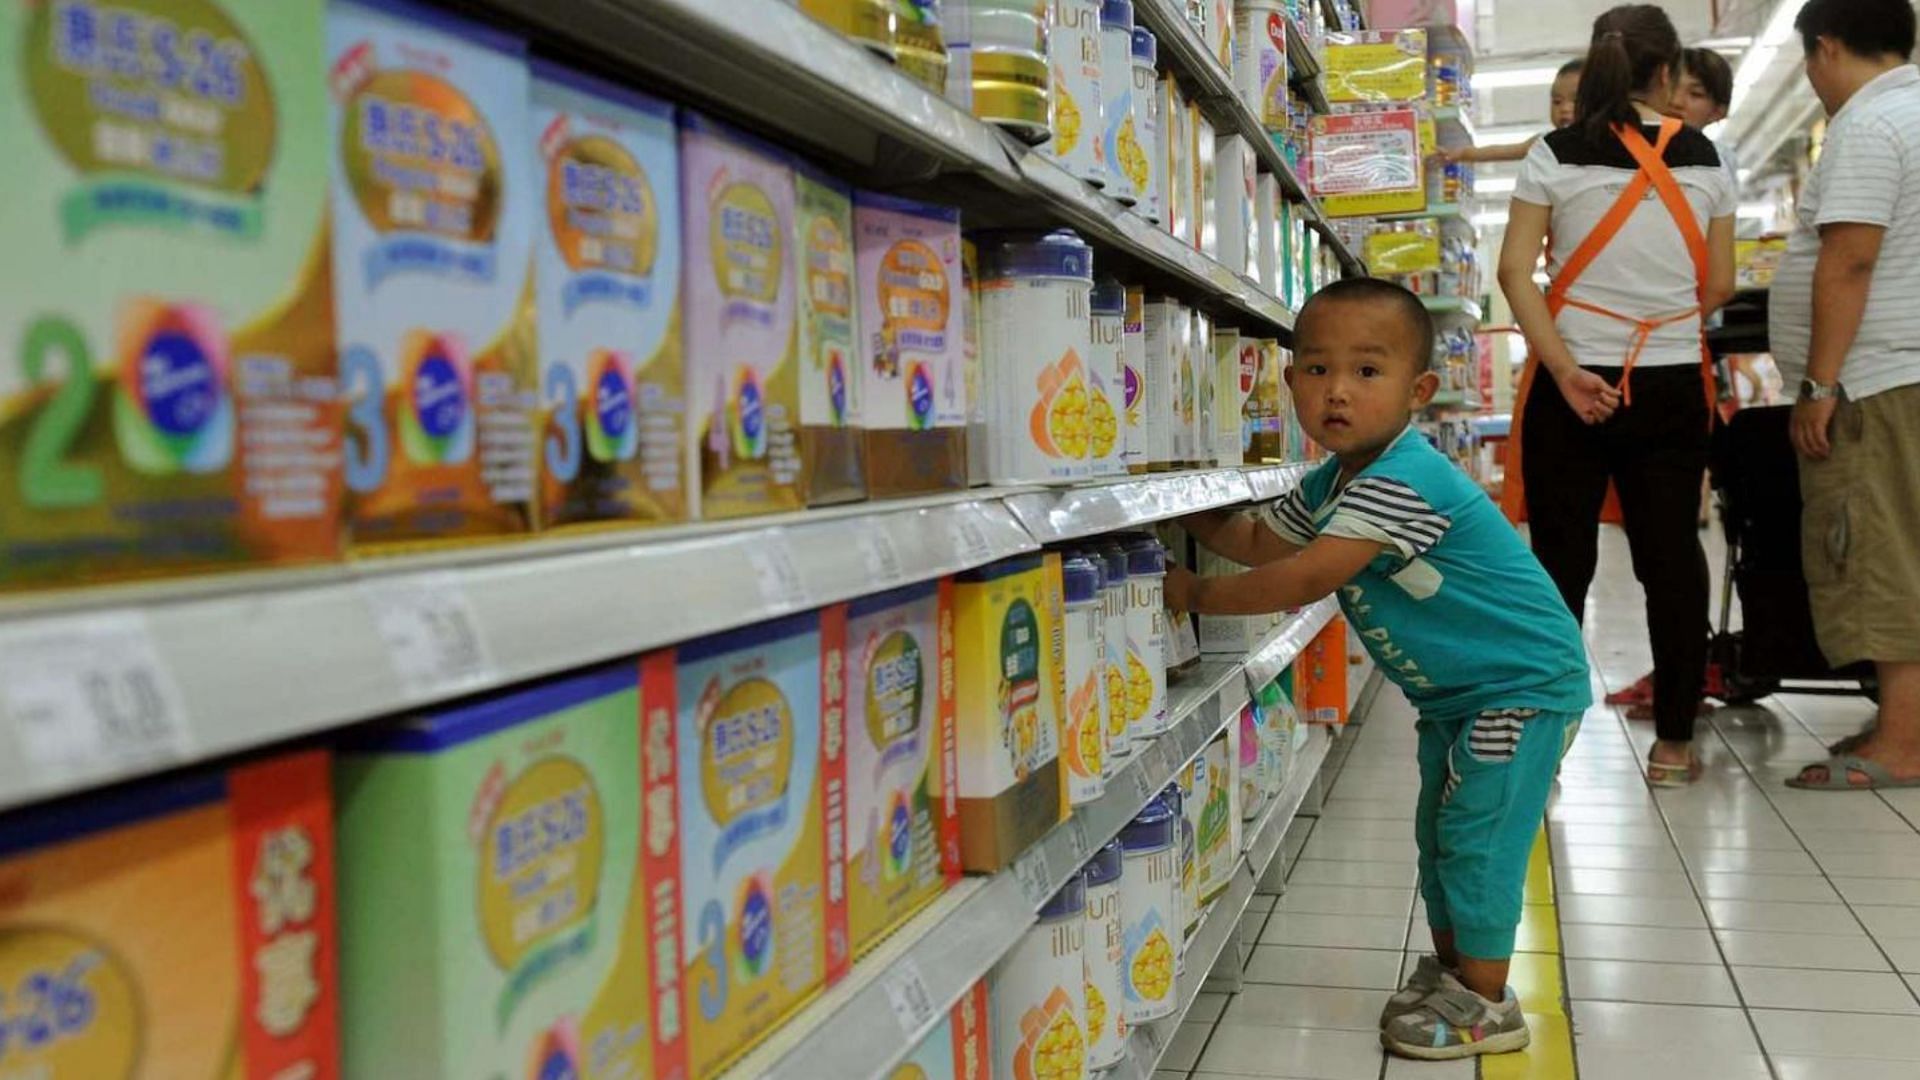 Lead levels in baby food may be reduced by up to 25 to 27 percent with the proposed action levels (Image via STR/AFP/Getty Images)